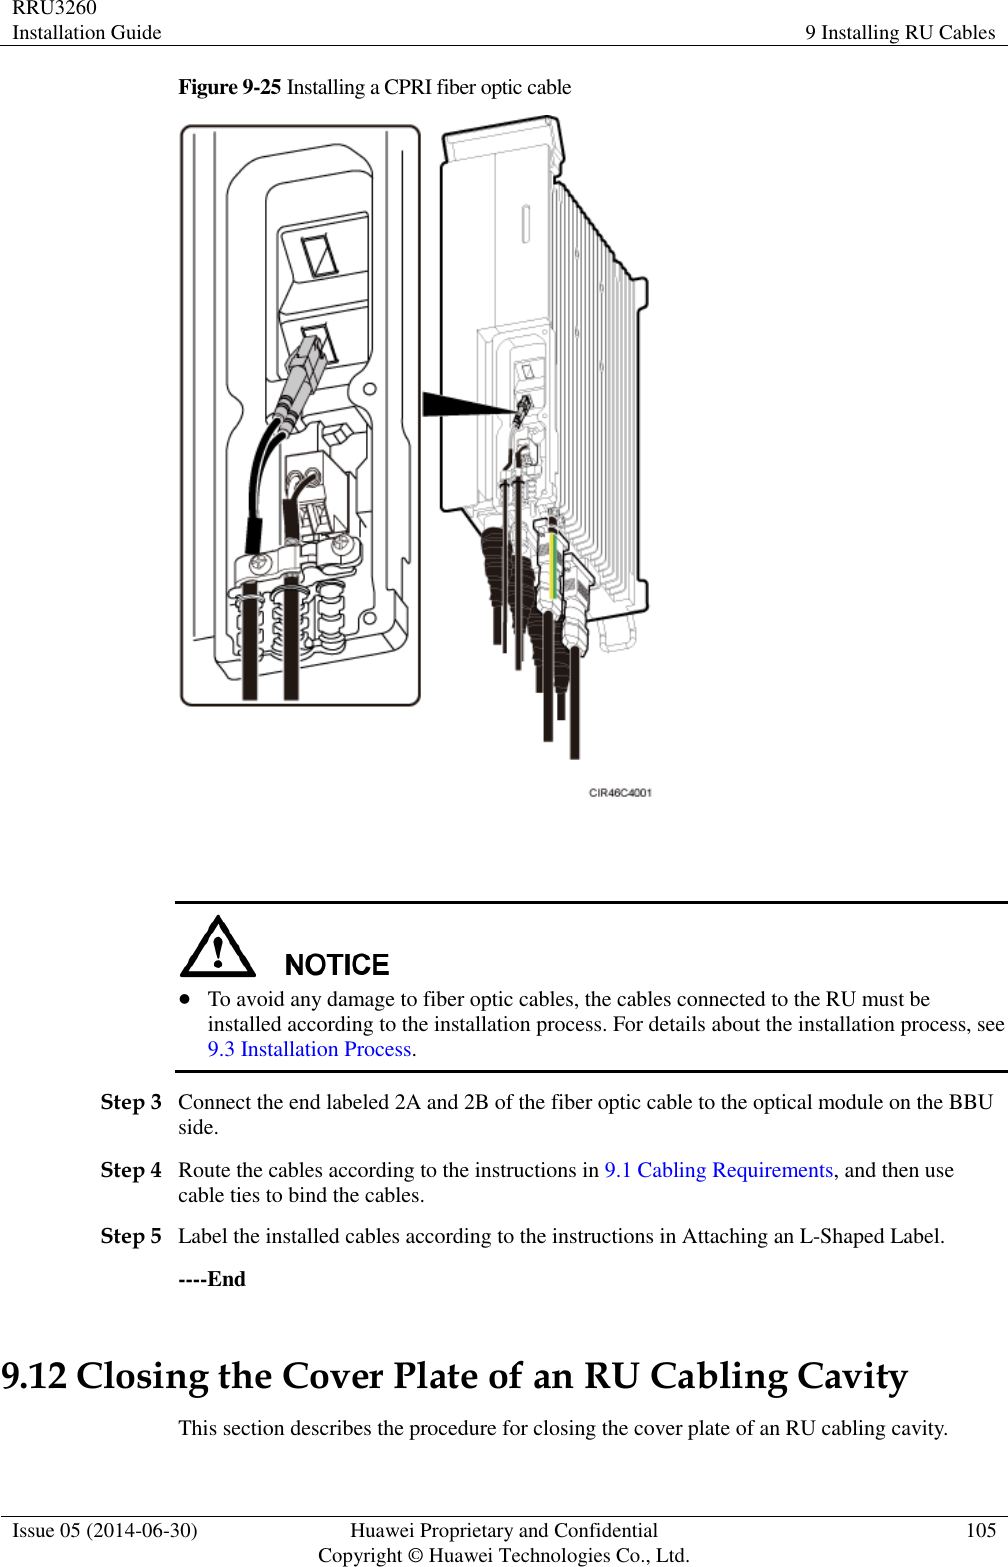 RRU3260 Installation Guide 9 Installing RU Cables  Issue 05 (2014-06-30) Huawei Proprietary and Confidential                                     Copyright © Huawei Technologies Co., Ltd. 105  Figure 9-25 Installing a CPRI fiber optic cable      To avoid any damage to fiber optic cables, the cables connected to the RU must be installed according to the installation process. For details about the installation process, see 9.3 Installation Process. Step 3 Connect the end labeled 2A and 2B of the fiber optic cable to the optical module on the BBU side. Step 4 Route the cables according to the instructions in 9.1 Cabling Requirements, and then use cable ties to bind the cables. Step 5 Label the installed cables according to the instructions in Attaching an L-Shaped Label. ----End 9.12 Closing the Cover Plate of an RU Cabling Cavity This section describes the procedure for closing the cover plate of an RU cabling cavity. 